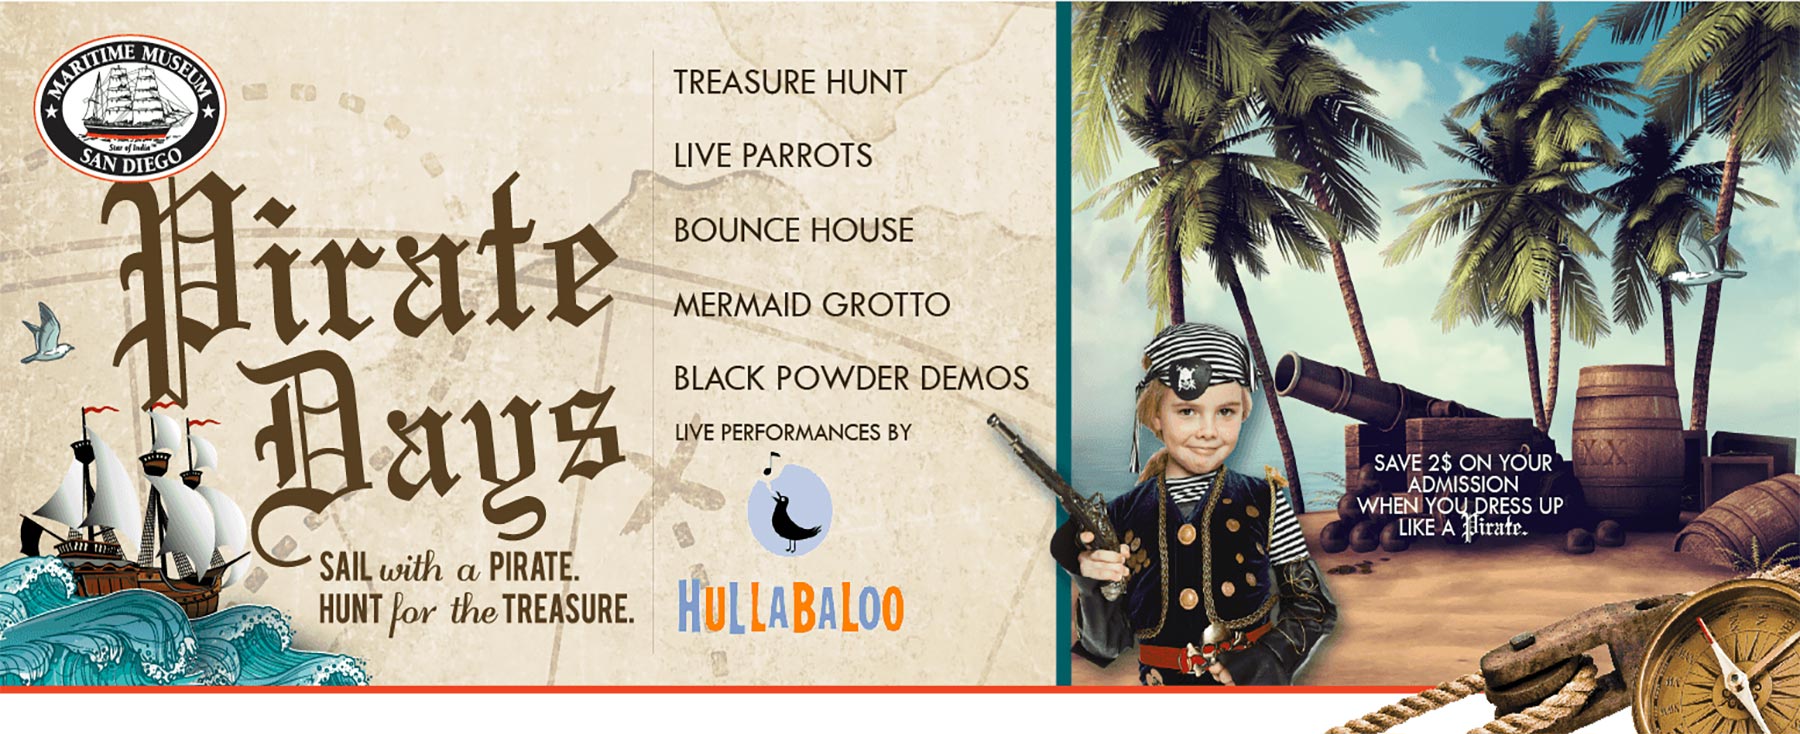 Pirate Days - Top Things to Do in San Diego